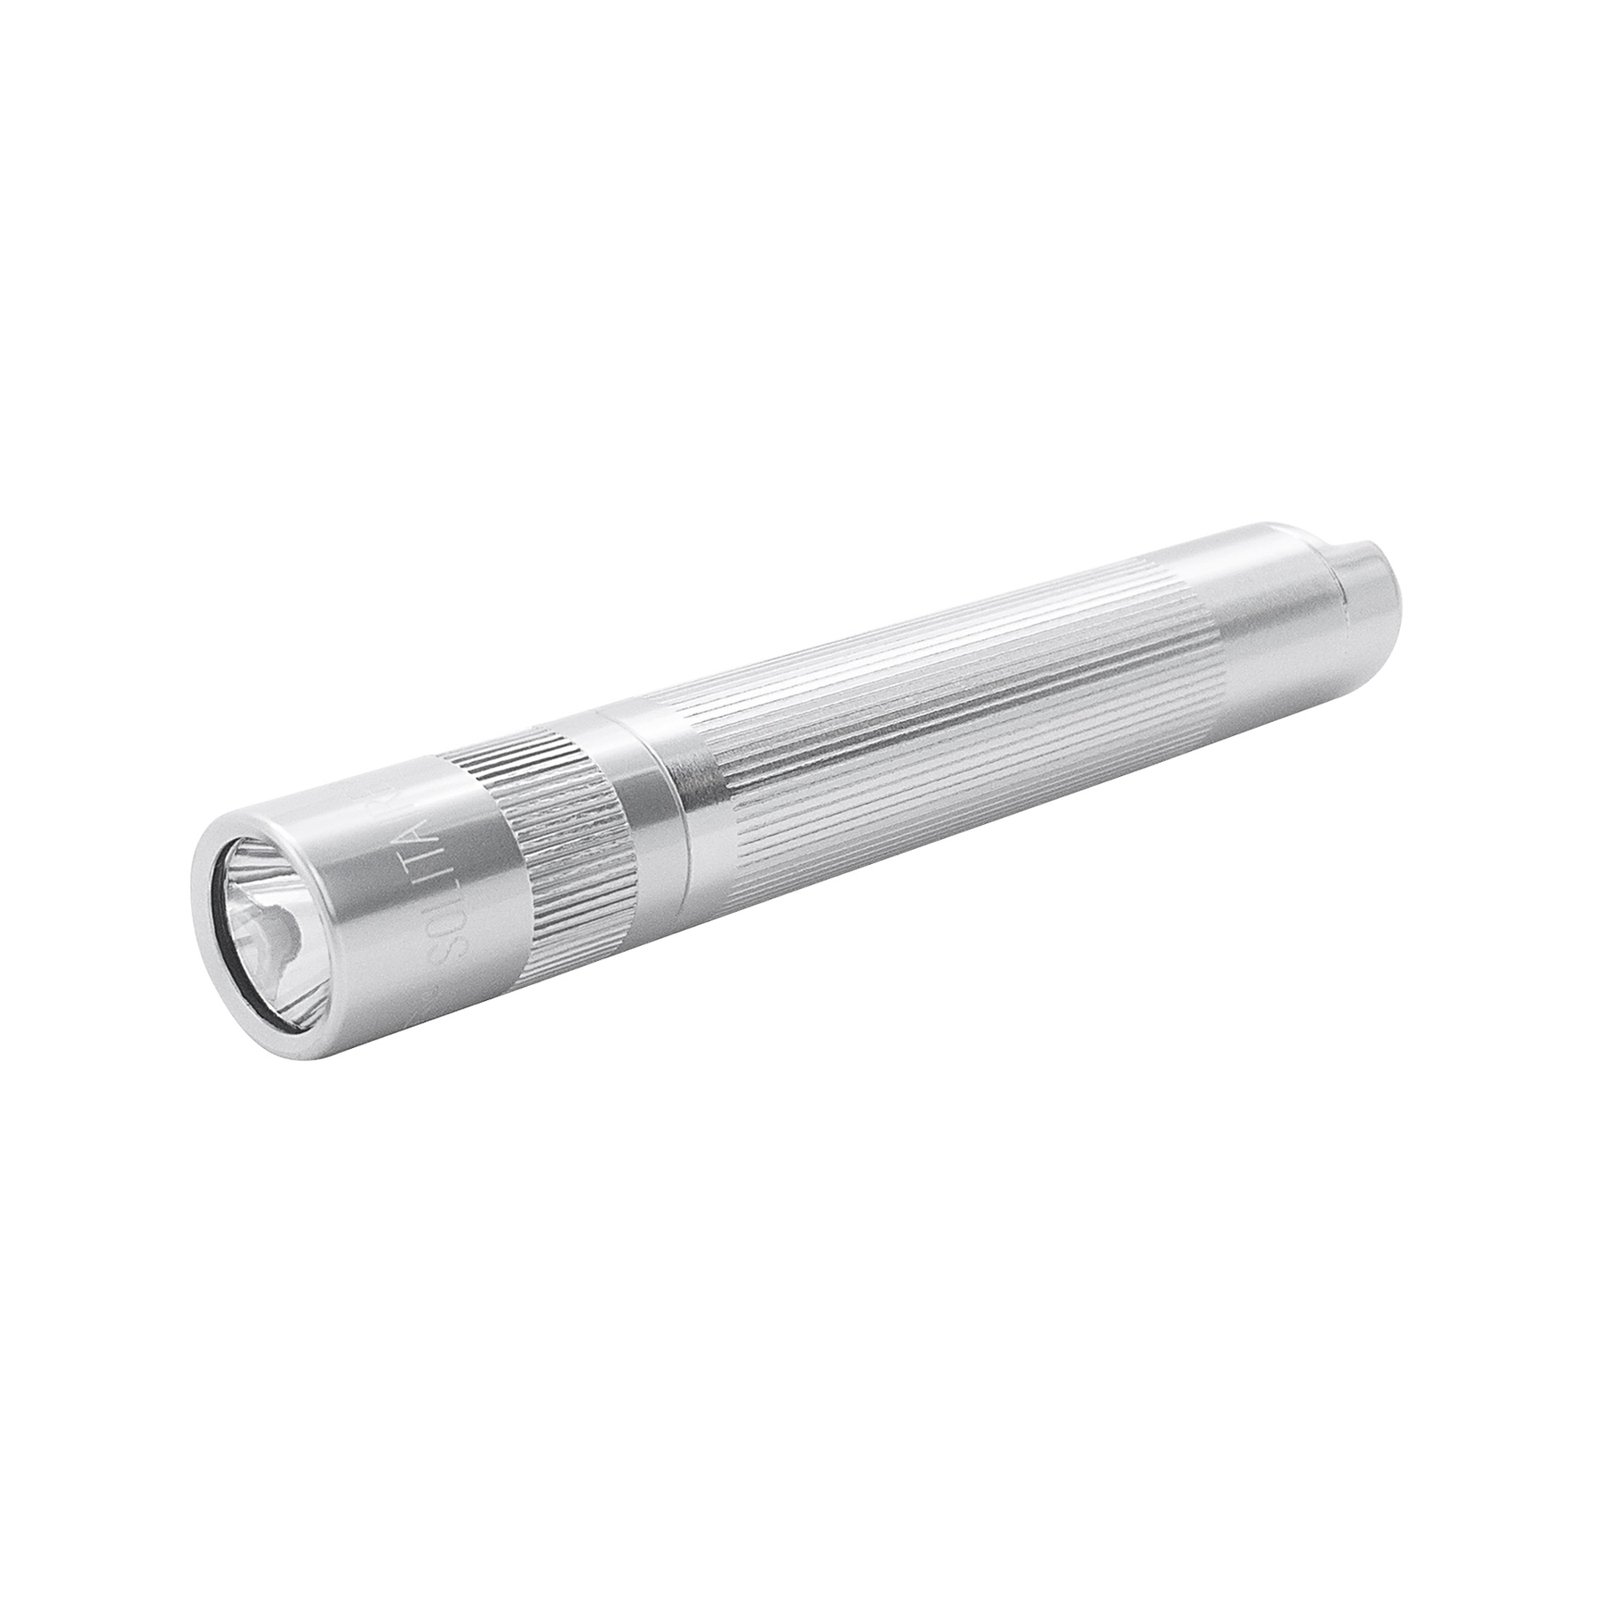 Maglite zaklamp Solitaire 1 Cell AAA, zilver